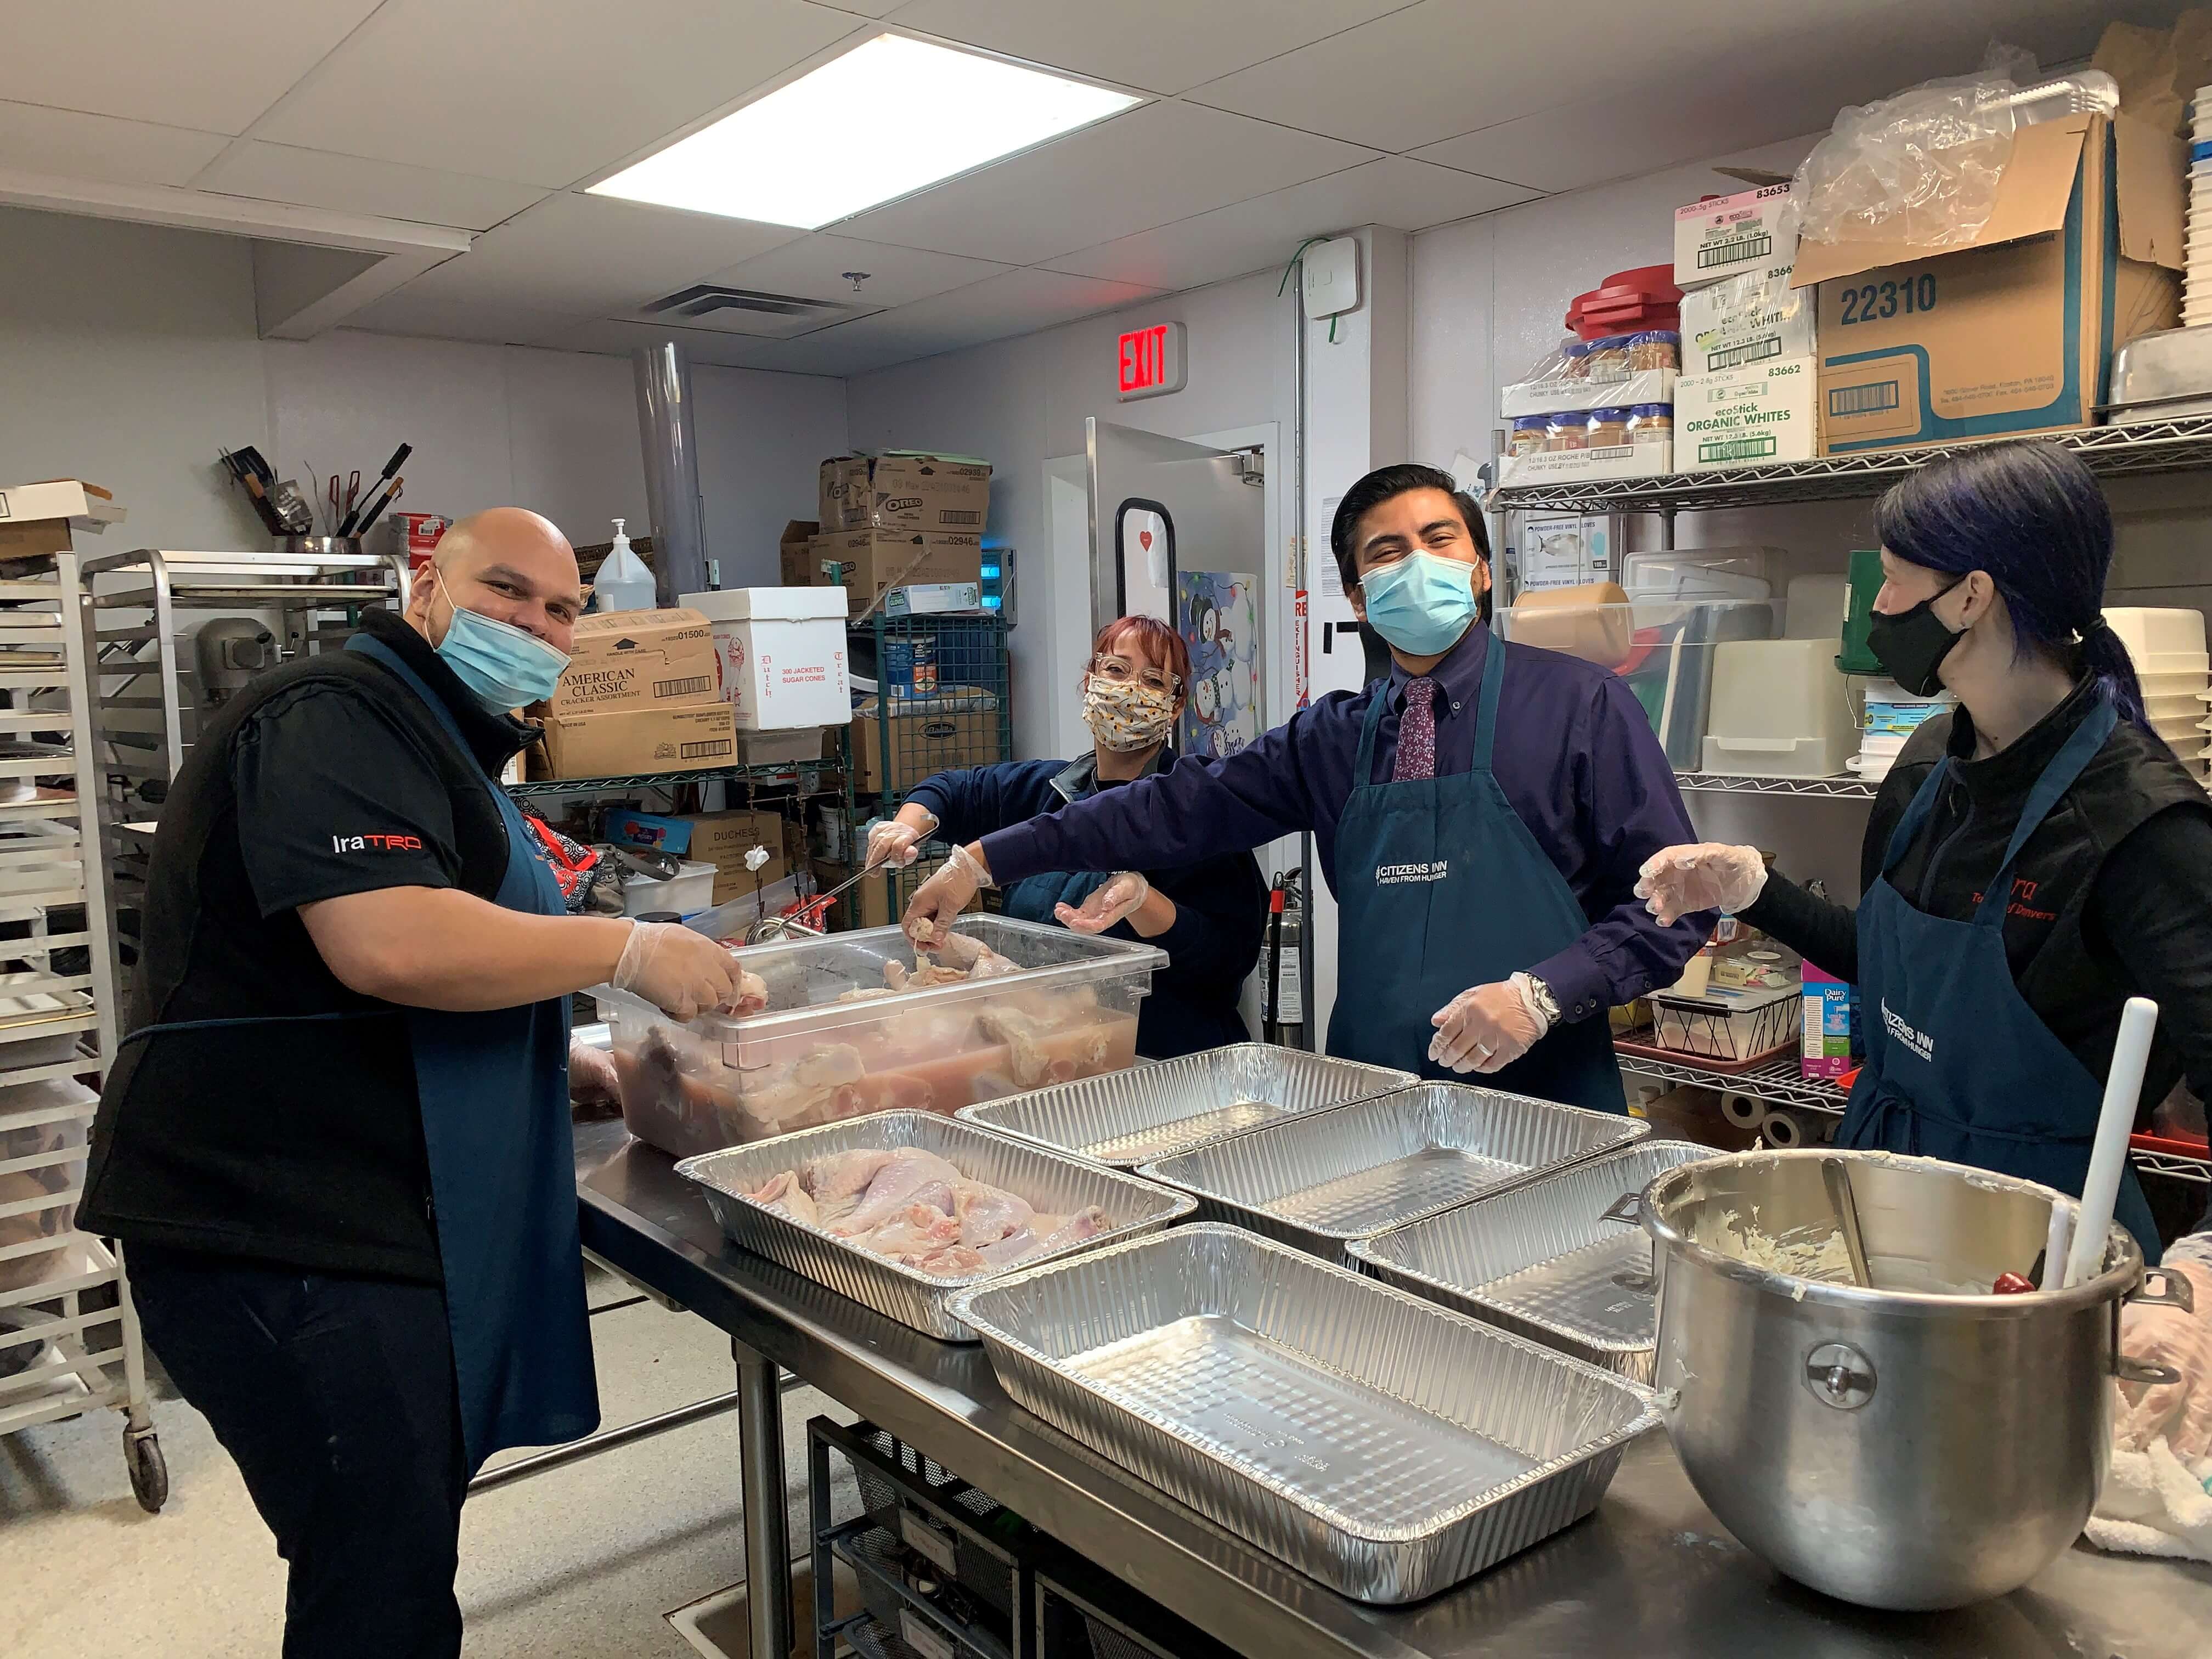 Ira Cares Team volunteers at Citizens Inn to provide meals for the Holidays